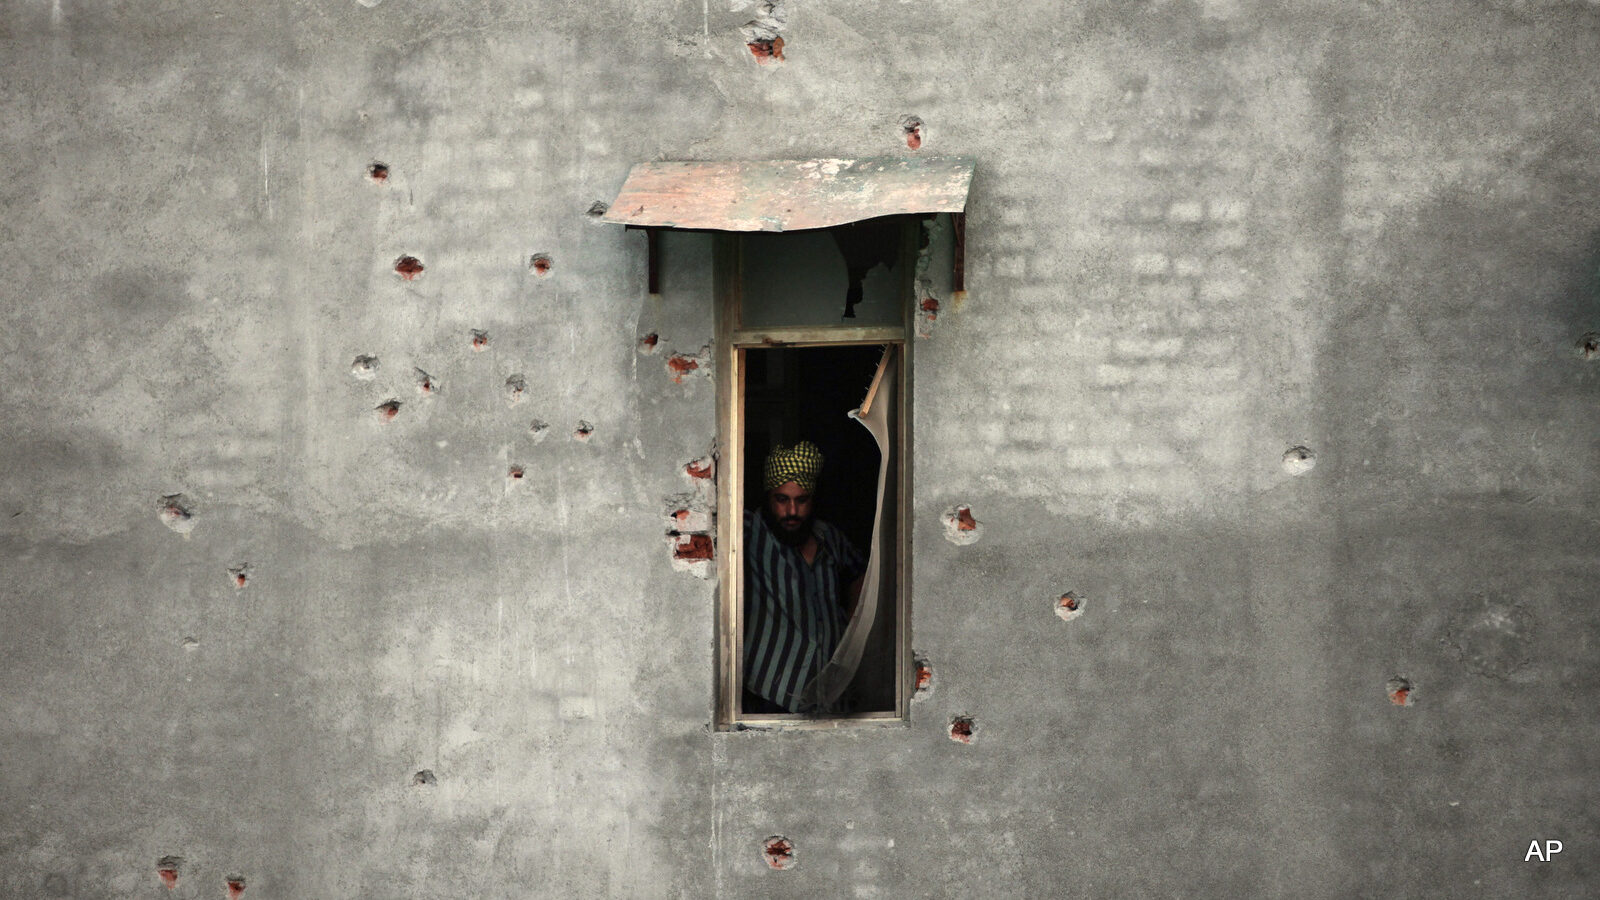 A civilian is seen through the window of a residential building, the walls of which have bullet marks following a rebel attack in the town of Dinanagar, in the northern state of Punjab, India, Monday, July 27, 2015. Indian forces fought an extended gunbattle Monday with militants who attacked a moving bus and stormed into a police station in a northern town bordering Pakistan.